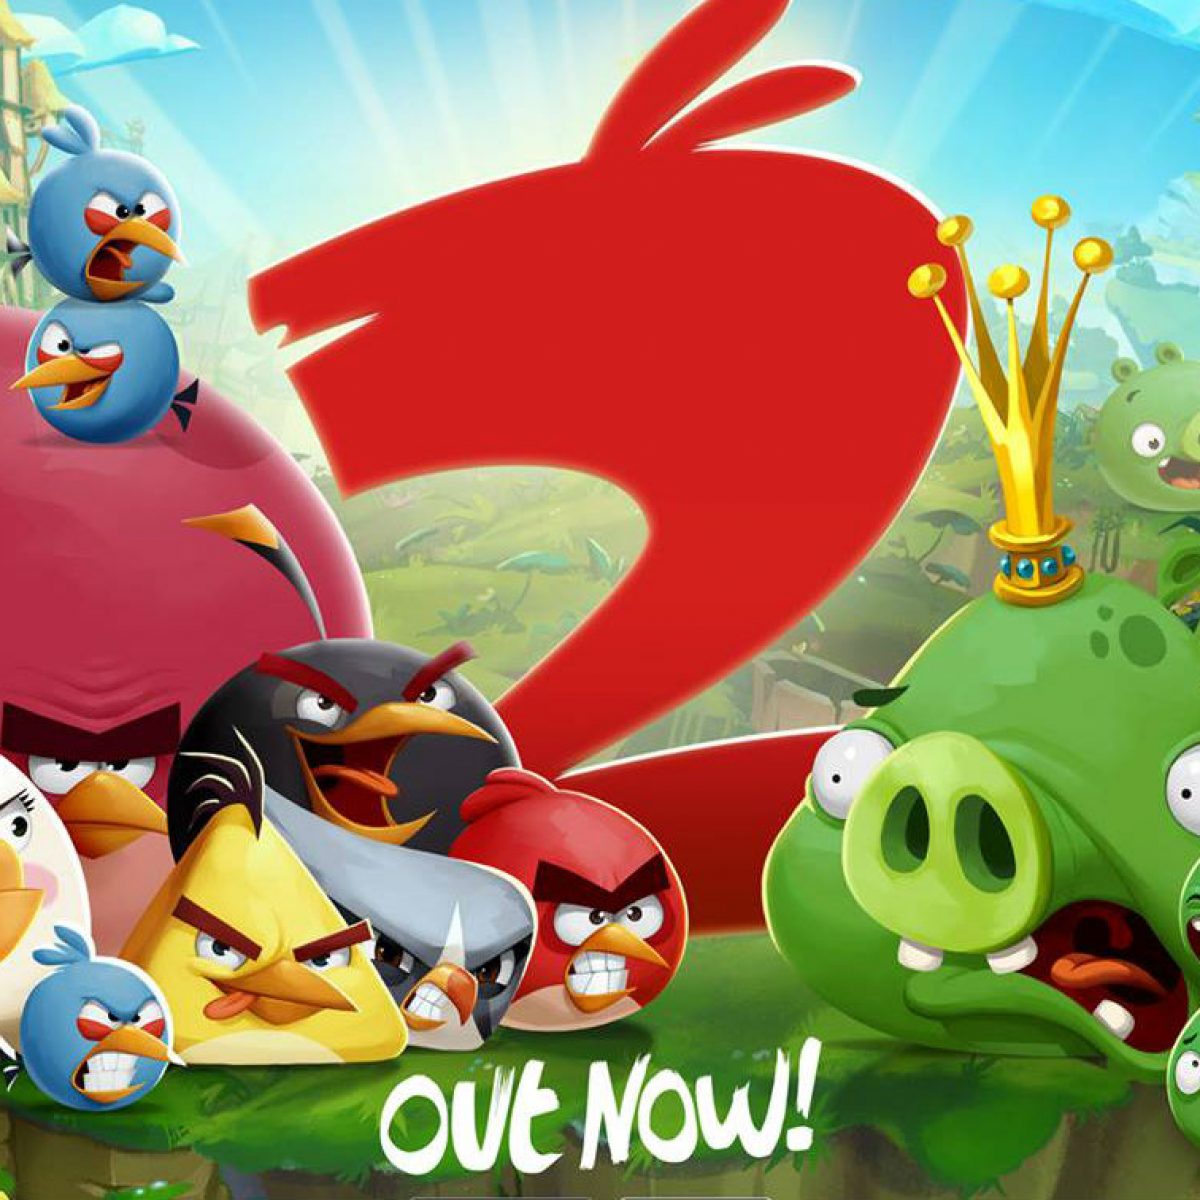 Rovio Releases Angry Birds 2 to Google Play, Complete With Magic Spells and  Boss Piggies